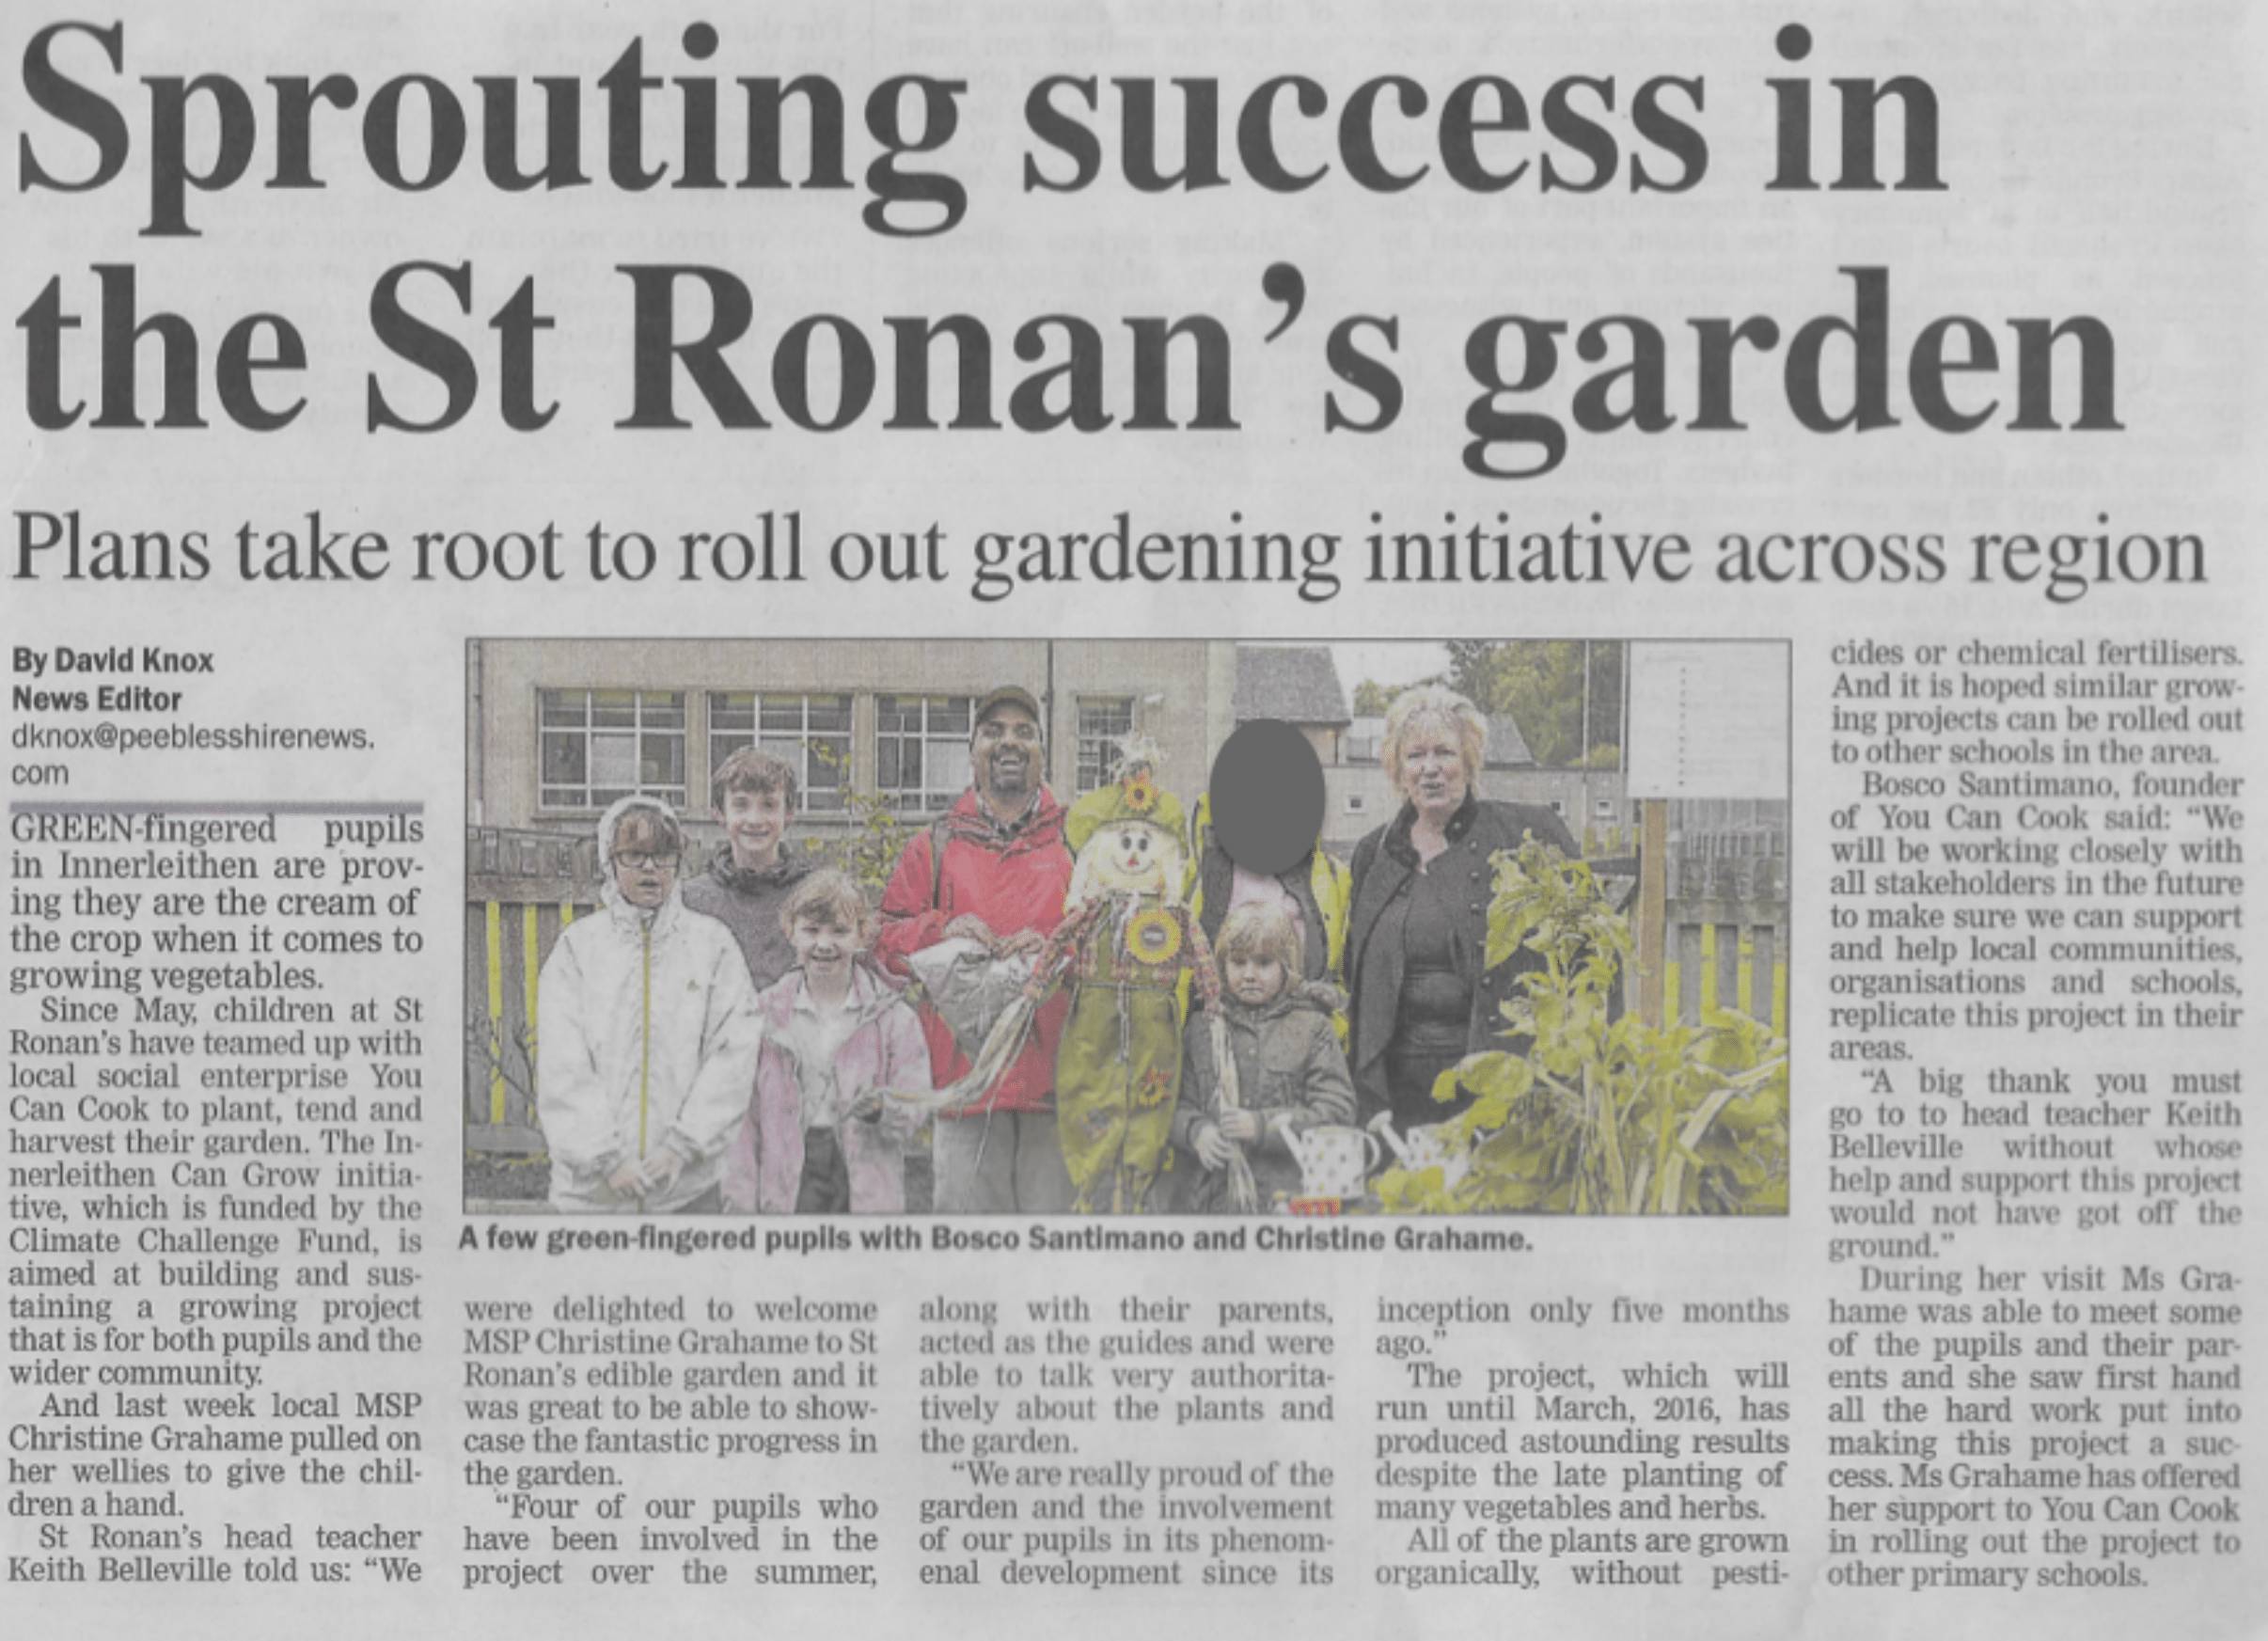 Press Clipping: Sprouting success in the St Ronan's garden